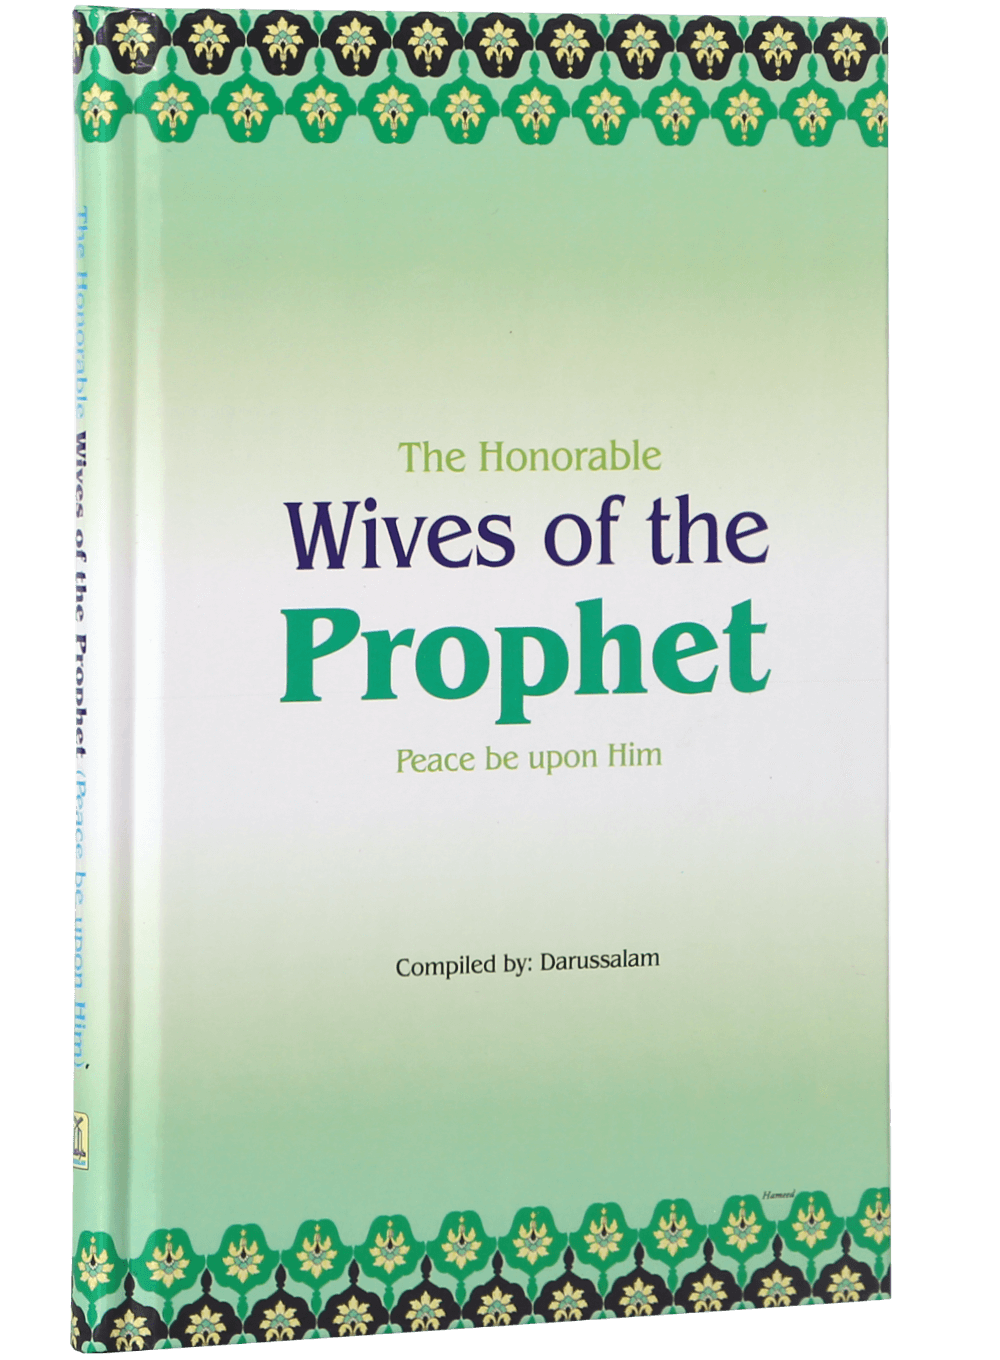 darussalam-2017-10-04-10-21-29the-honorable-wives-of-the-prophet-(2)